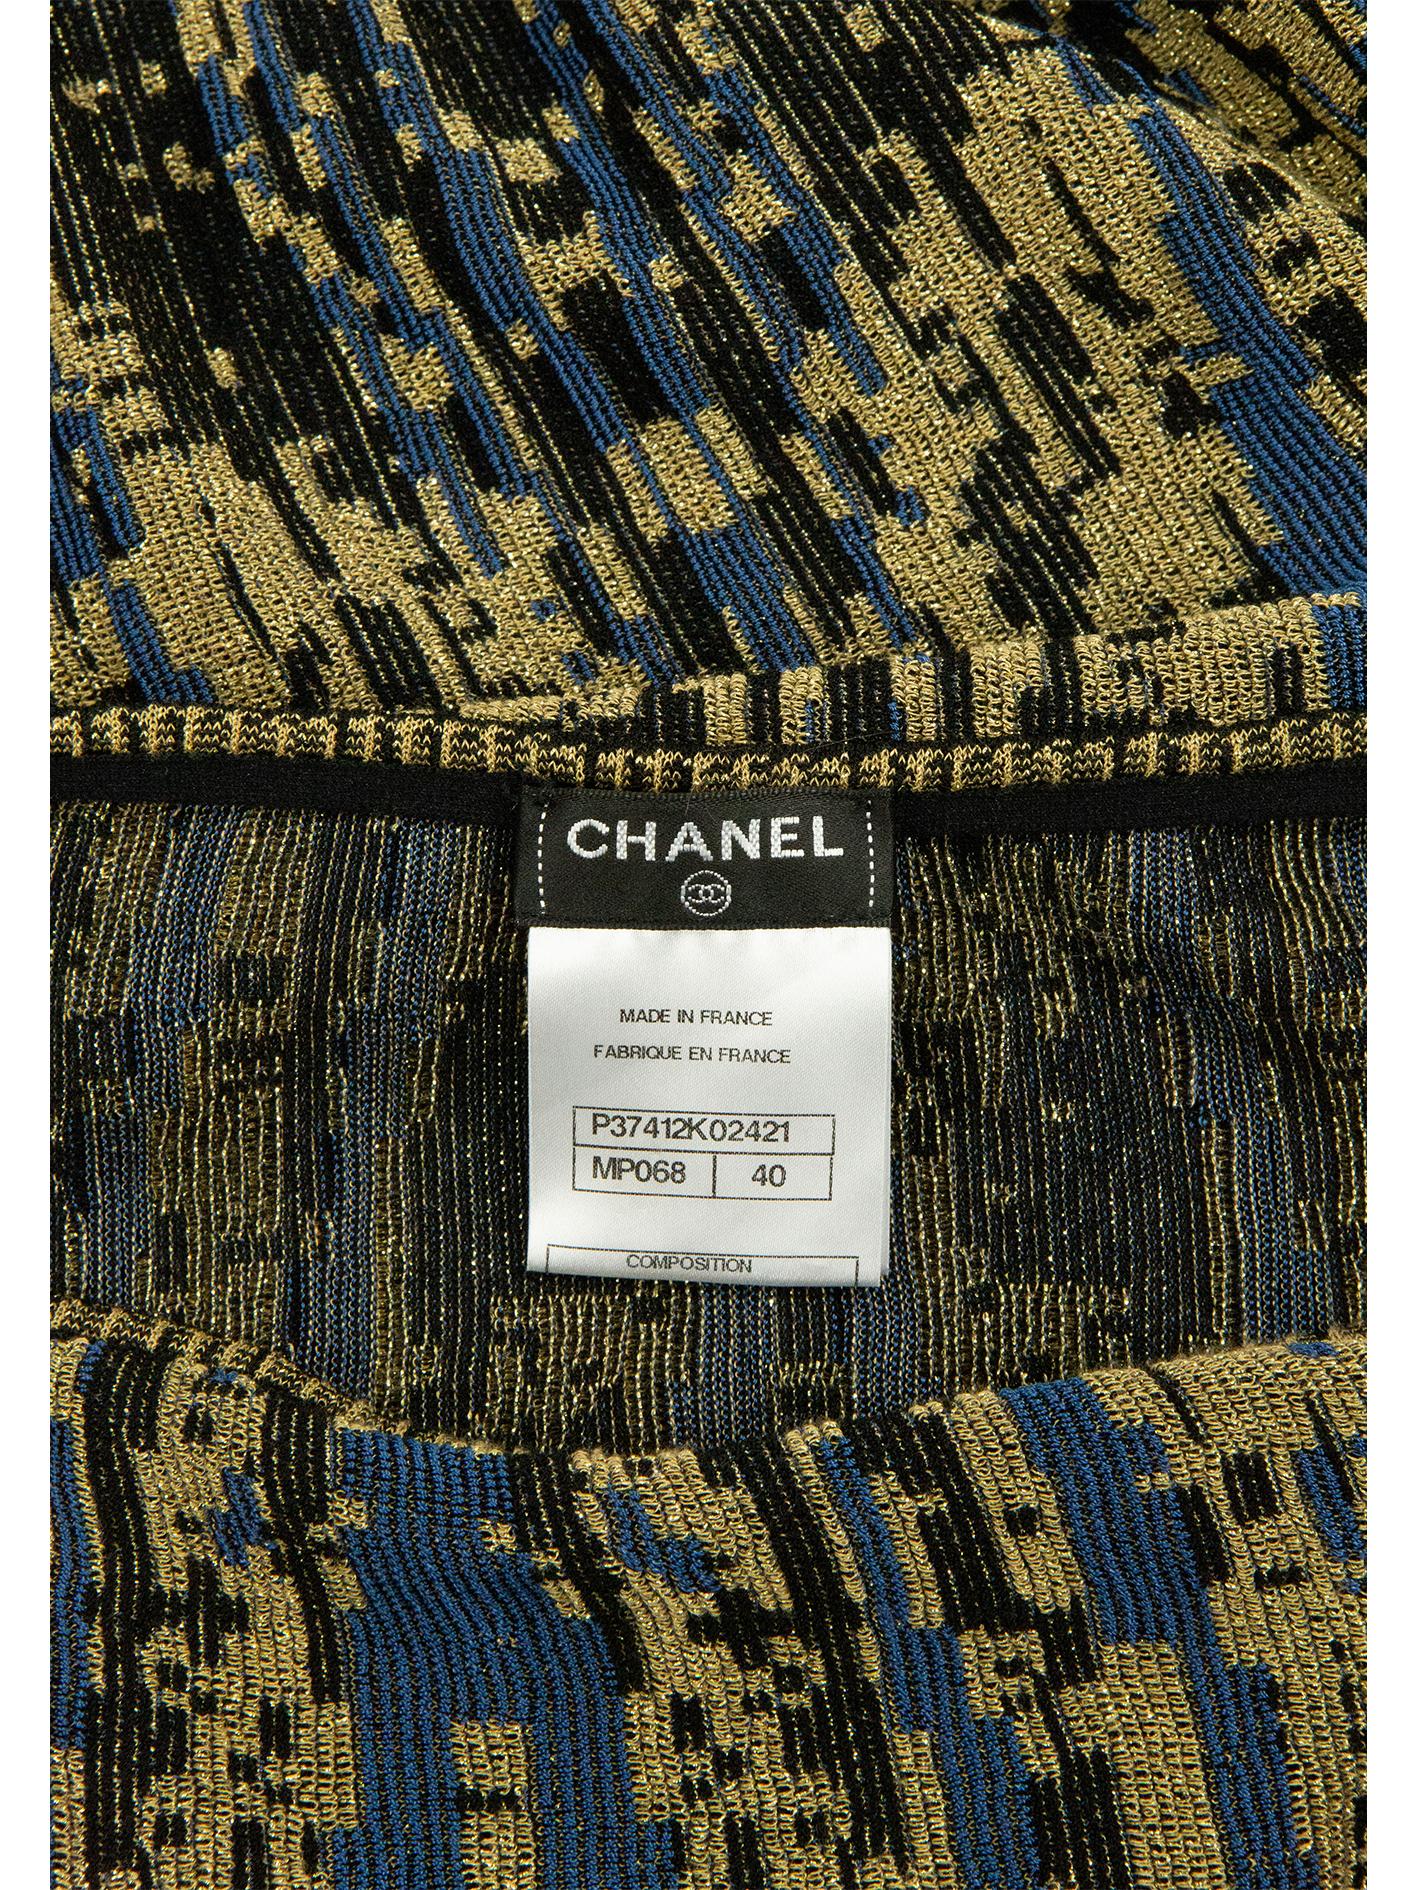 Chanel Black, Gold and Royal Blue Lurex Dress For Sale 3